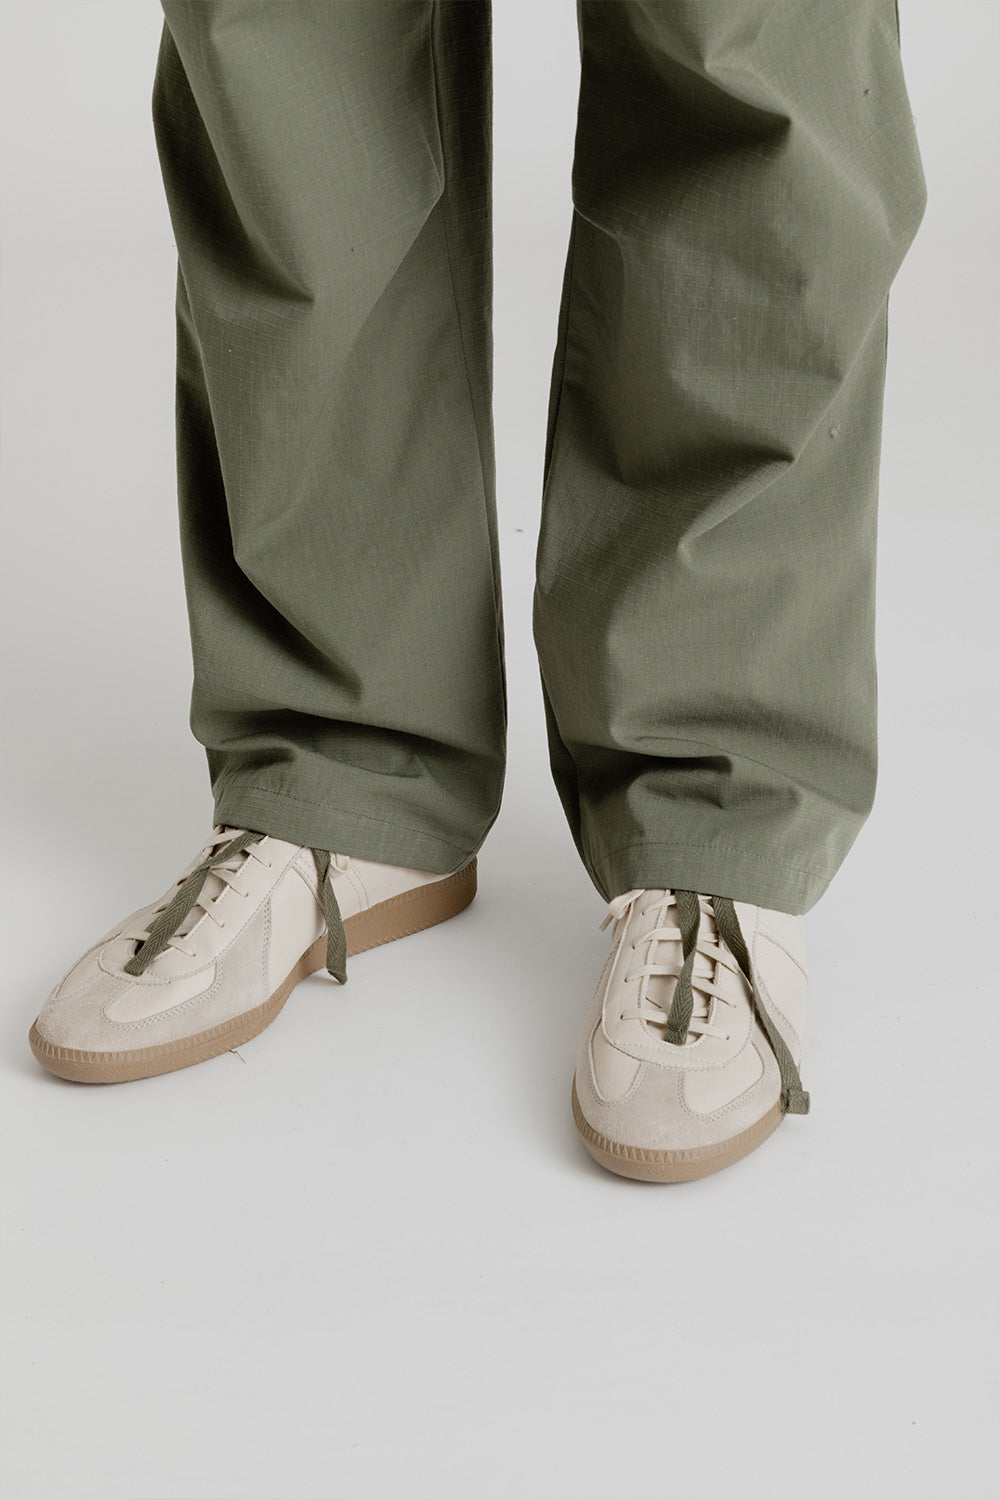 Frizmworks Army Two Tuck Relaxed Pants in Olive